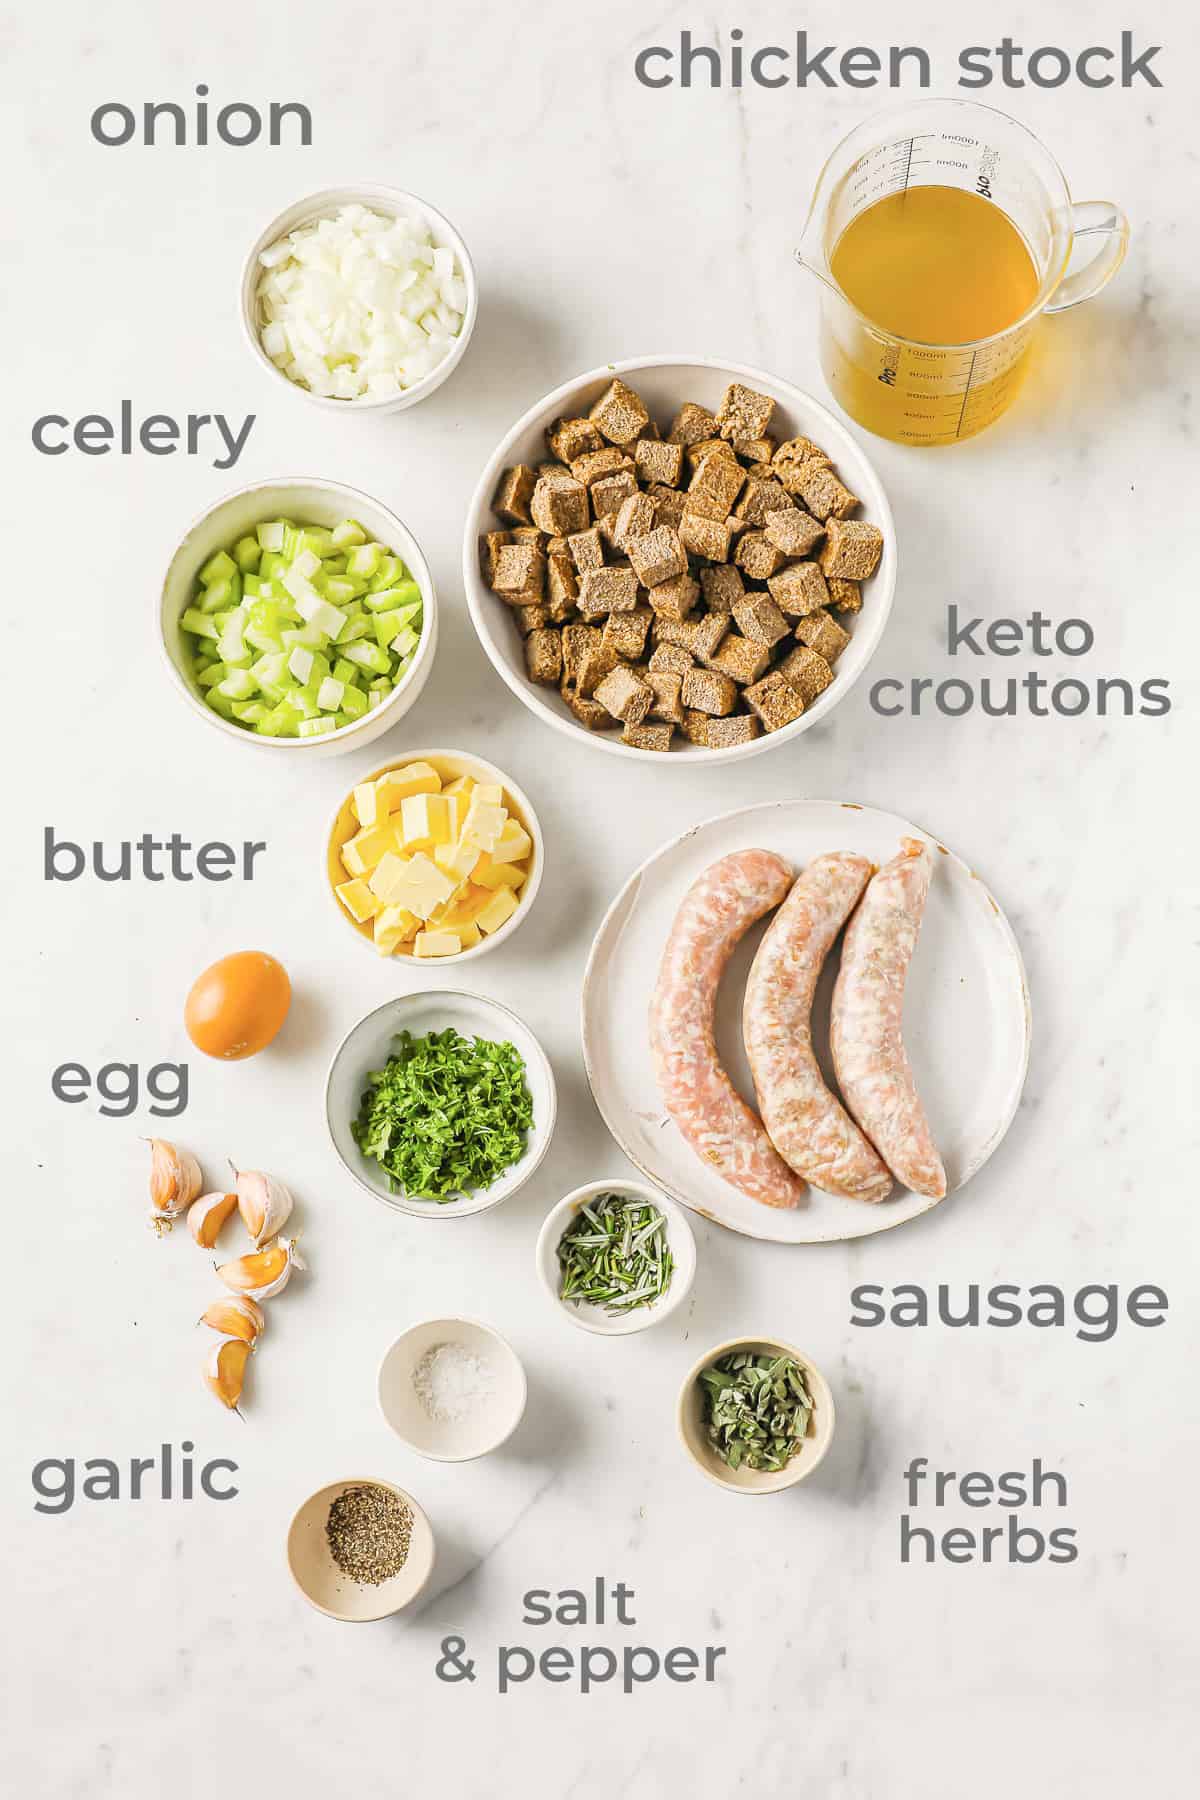 Ingredients all laid out to make stuffing - croutons, sausage, onion, celery, herbs, garlic, egg, and chicken stock.